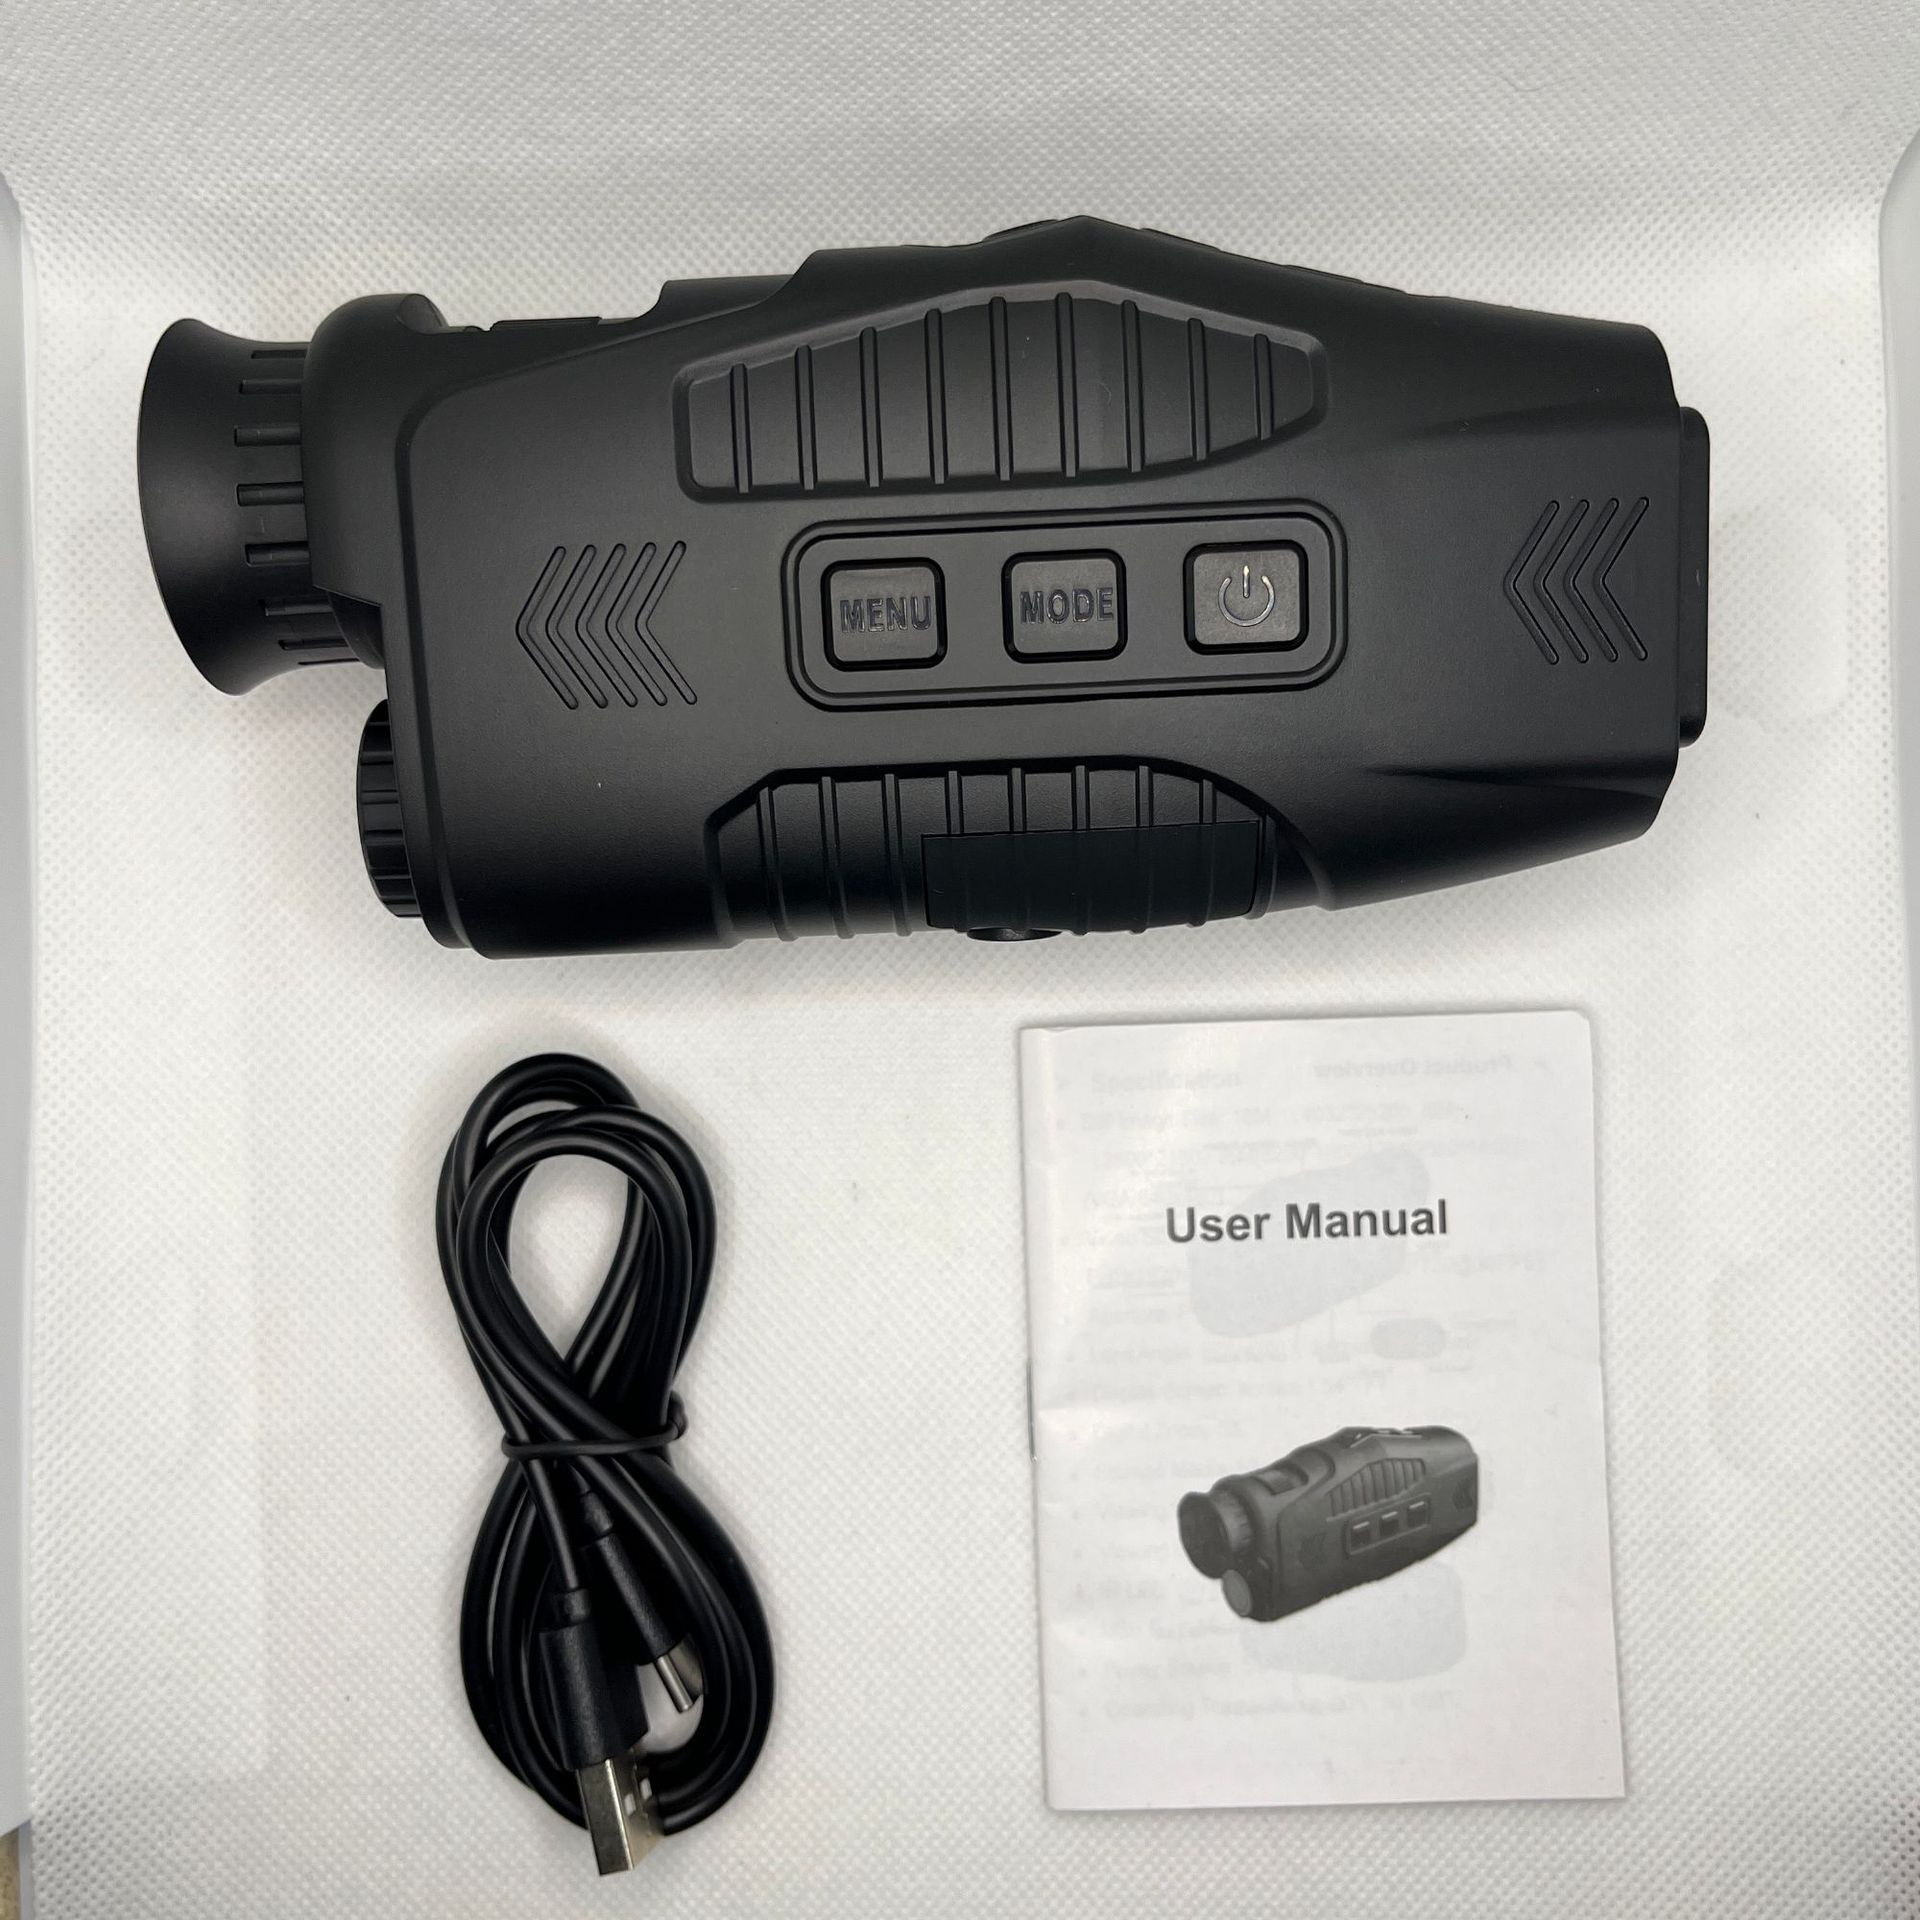 A comprehensive monocular usage manual lies beside the sleek monocular and its accompanying cable, providing essential guidance for optimal operation and viewing experiences.